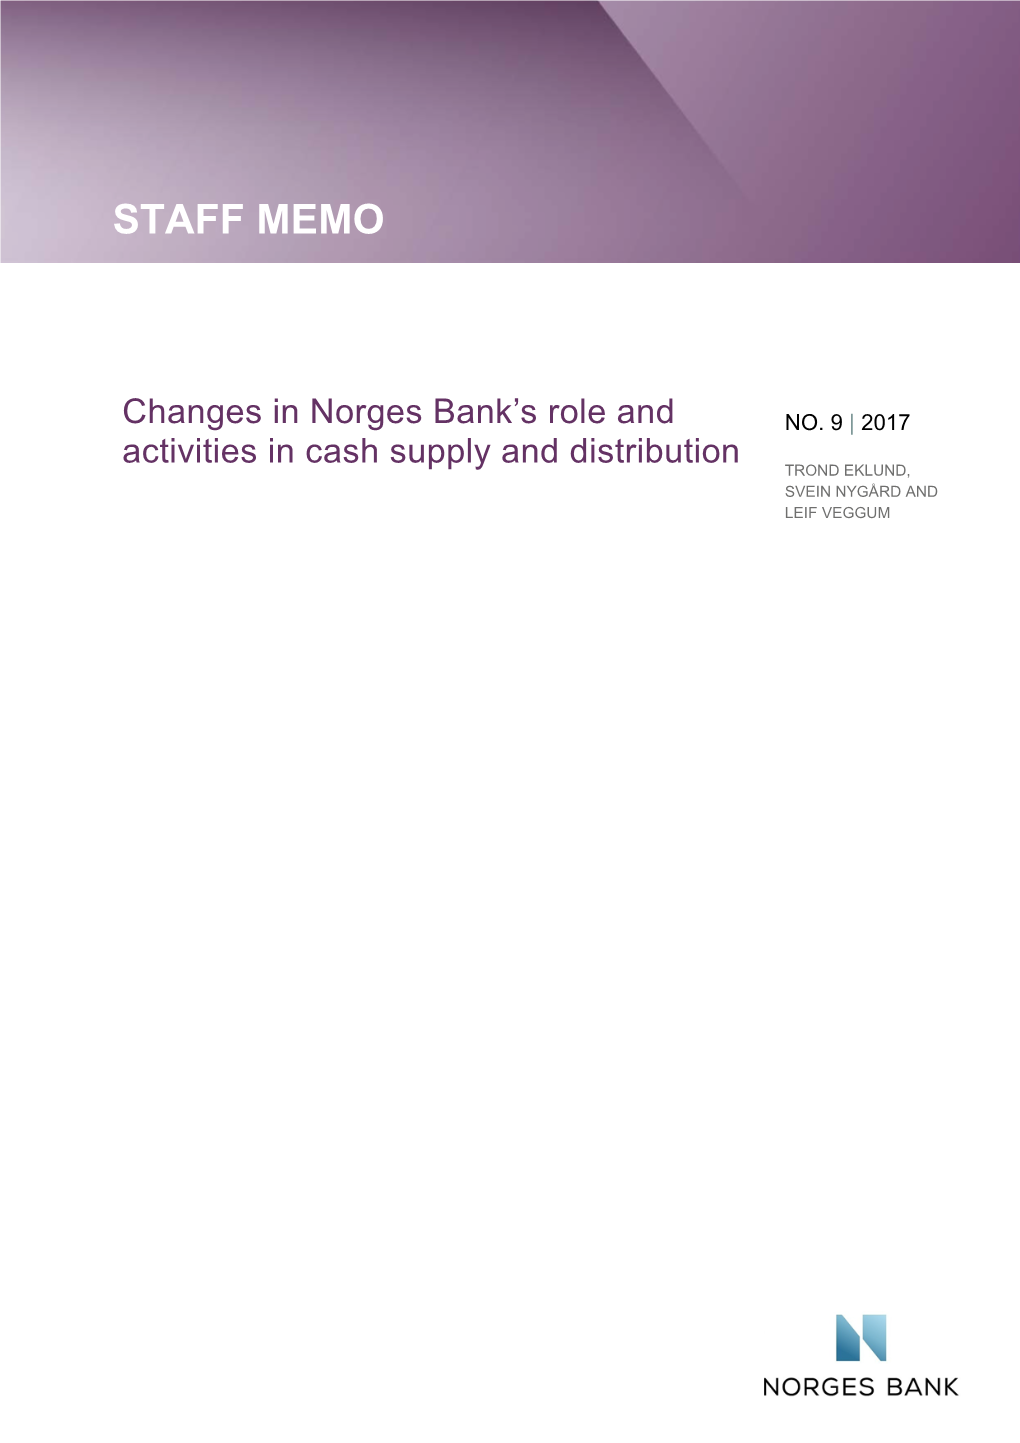 Changes in Norges Bank's Role and Activities in Cash Supply And